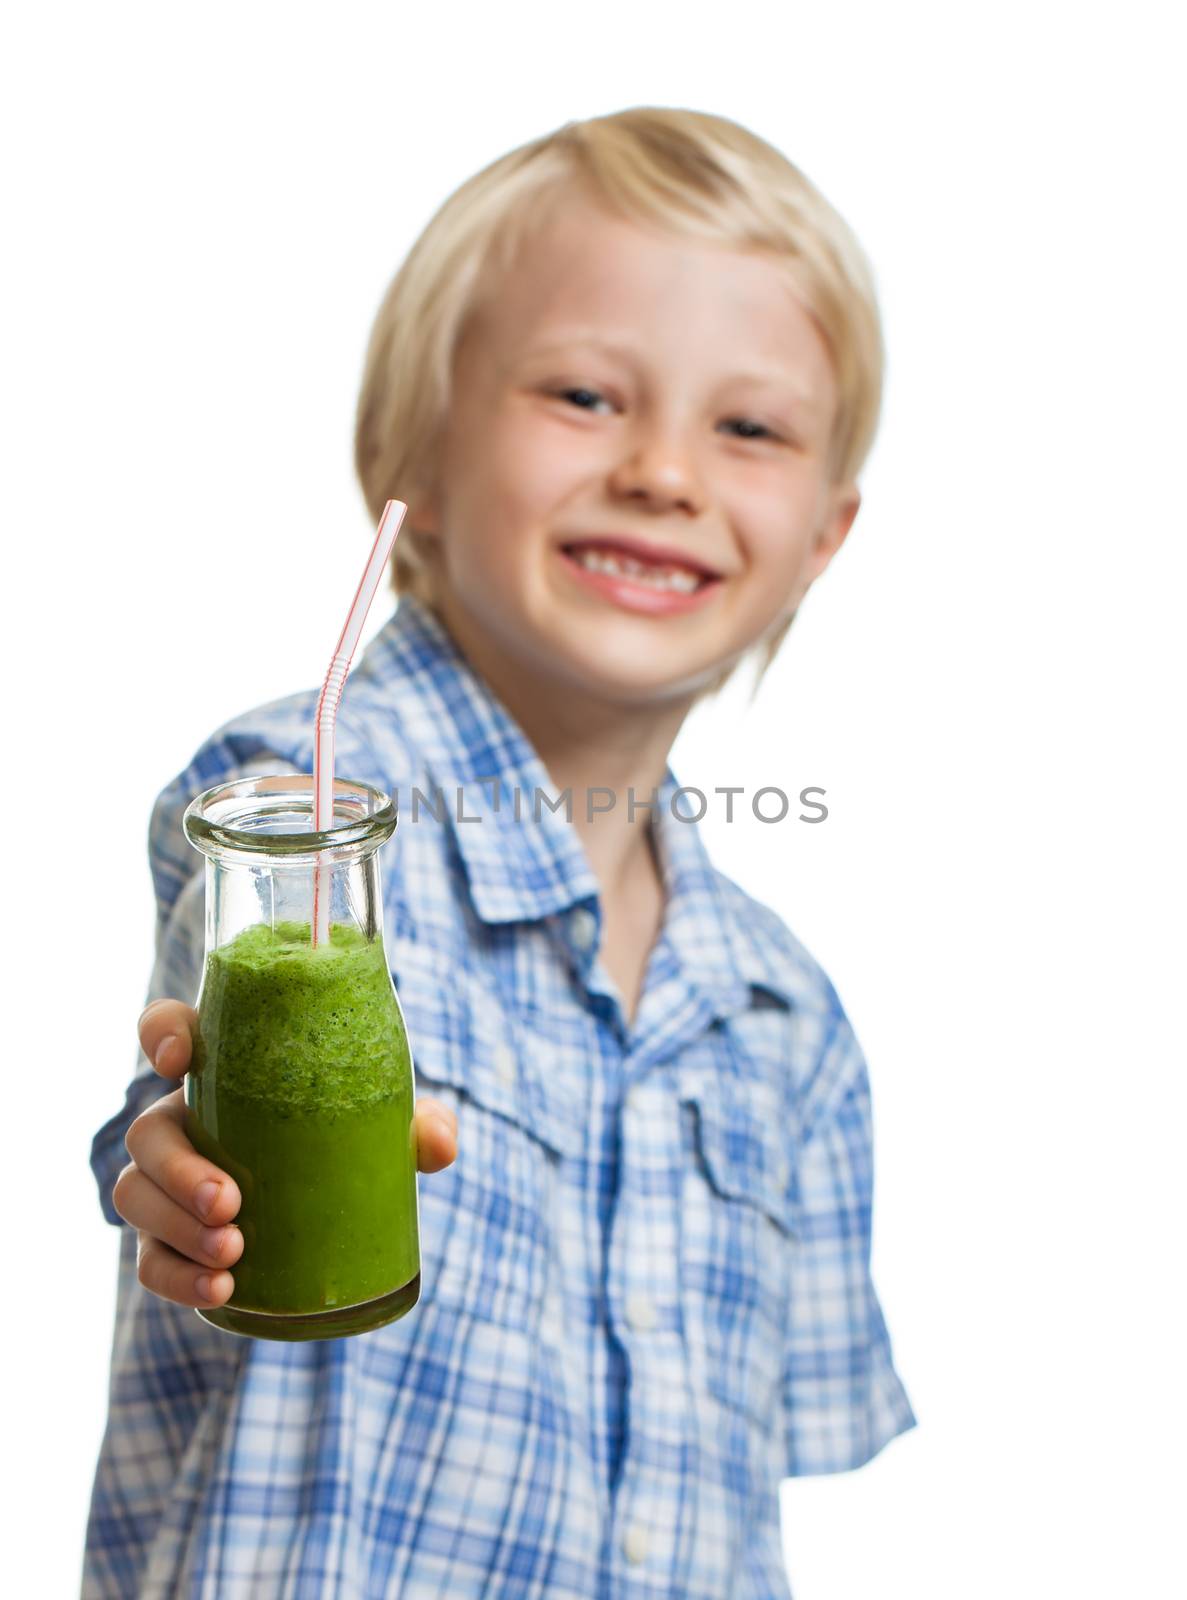 Cute boy holding green smoothie or juice by Jaykayl